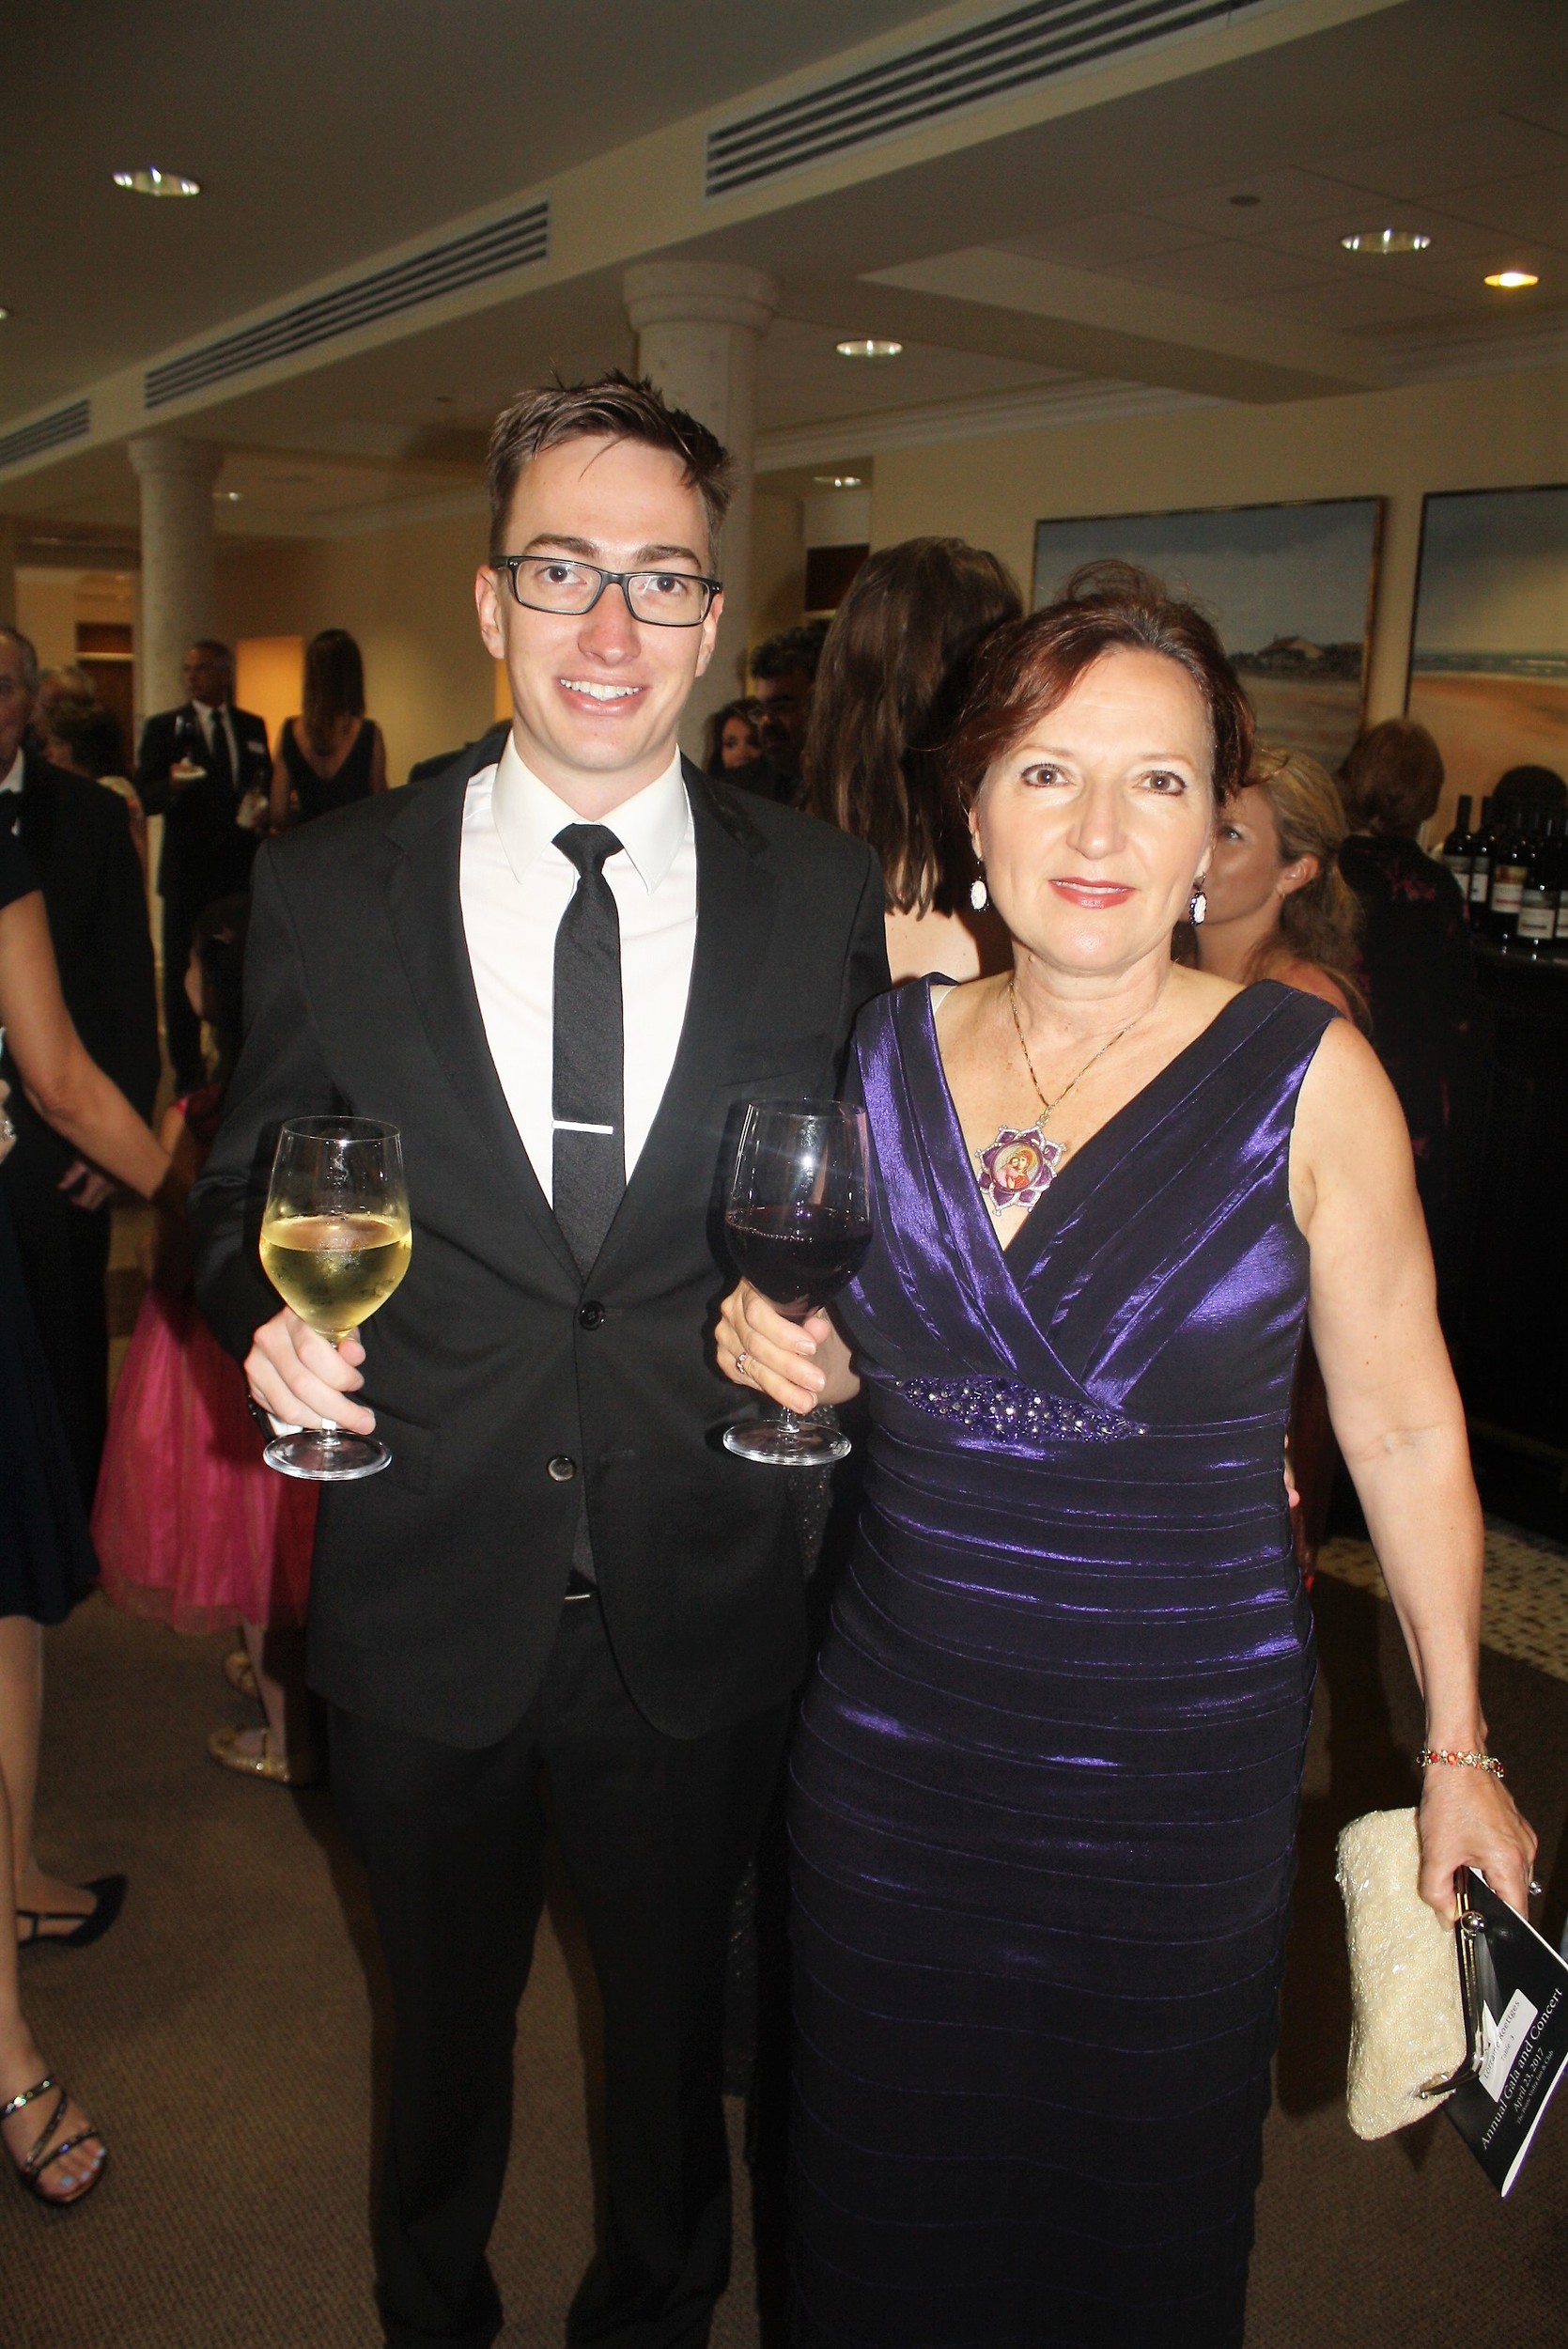 Symphony Associate Conductor Nathan Aspinall and Lorraine Roettges